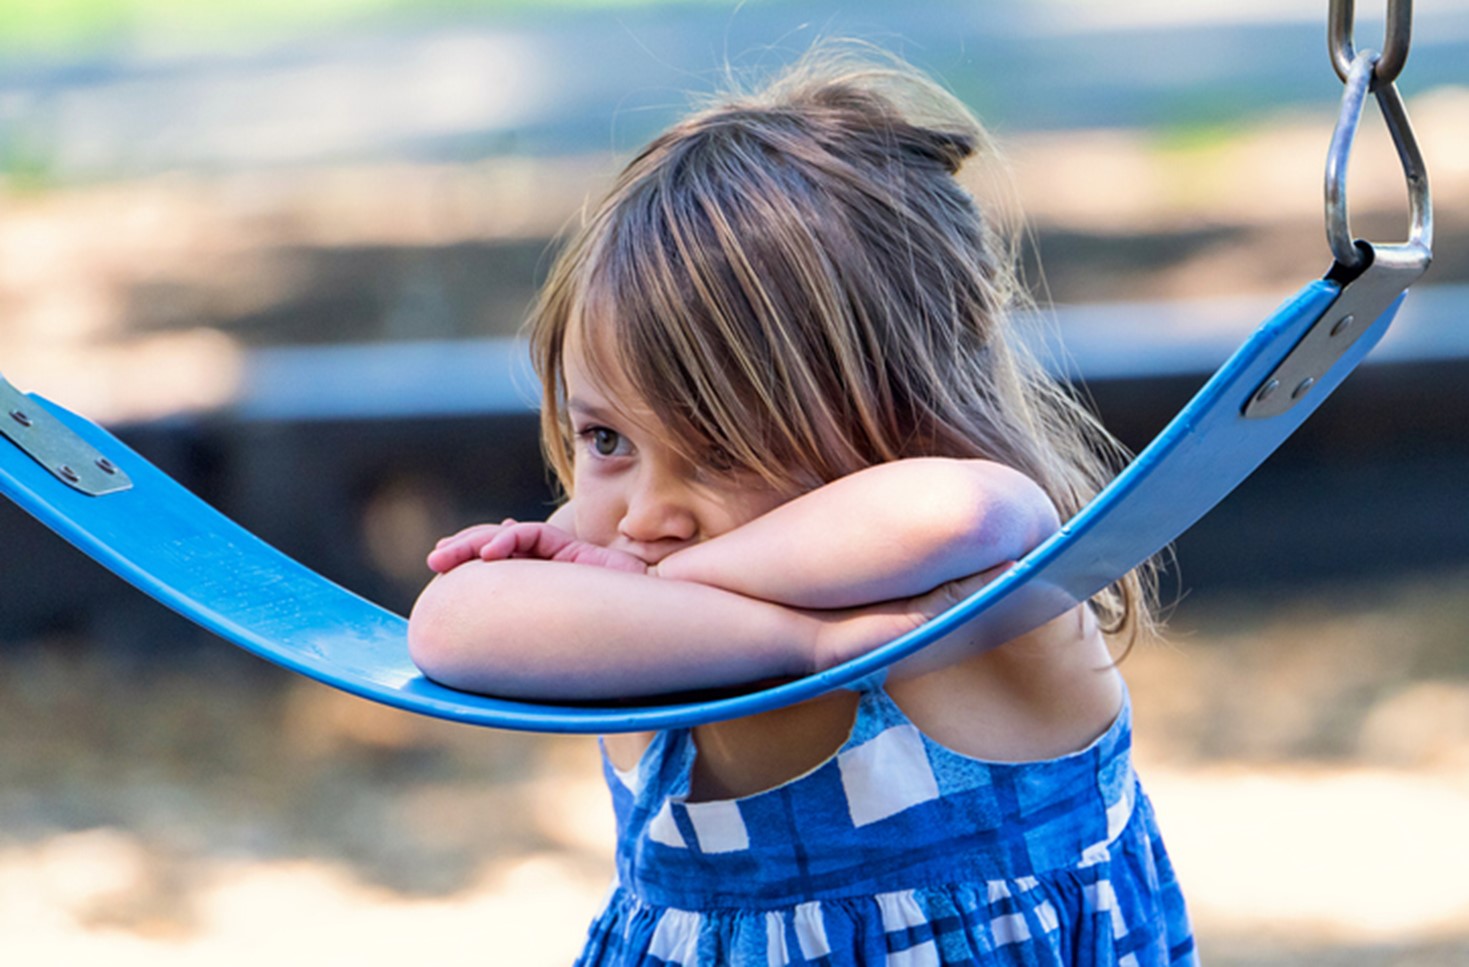 Image of young girl on a swing set.